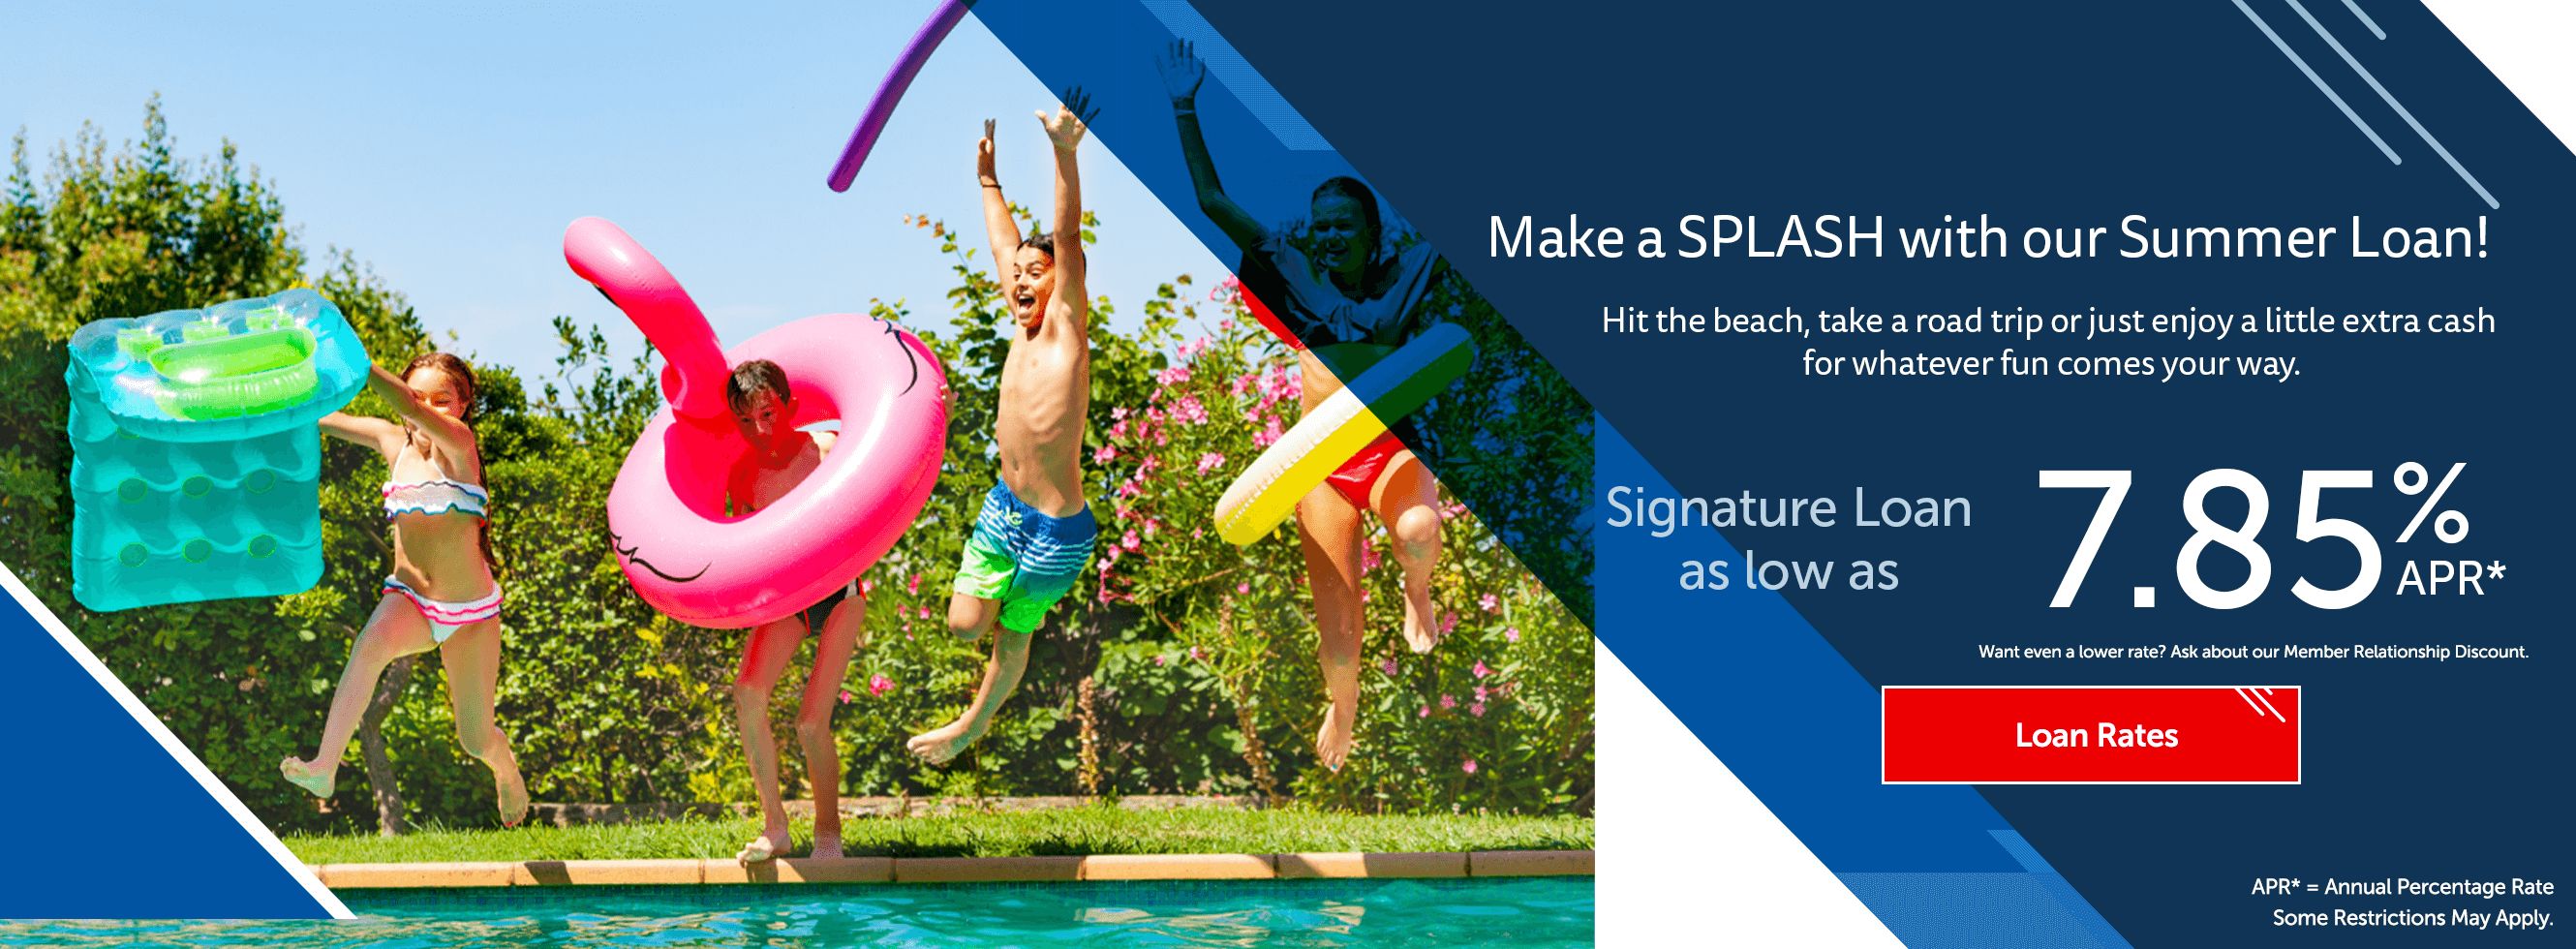 Make a SPLASH with out summer loan! 